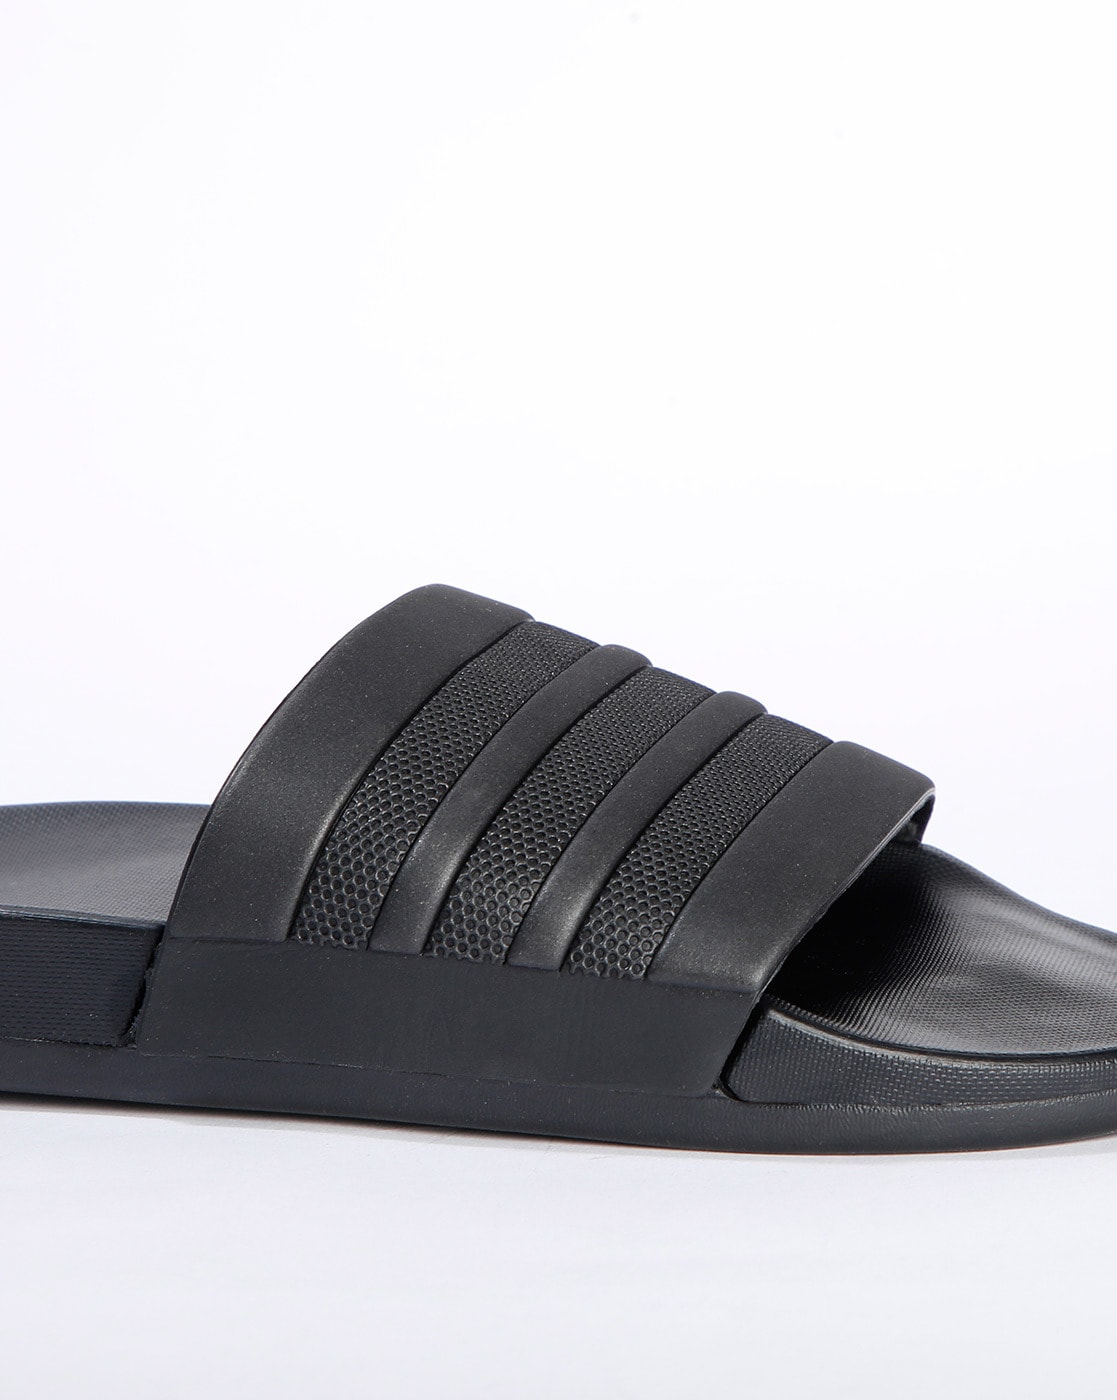 adidas all black slippers